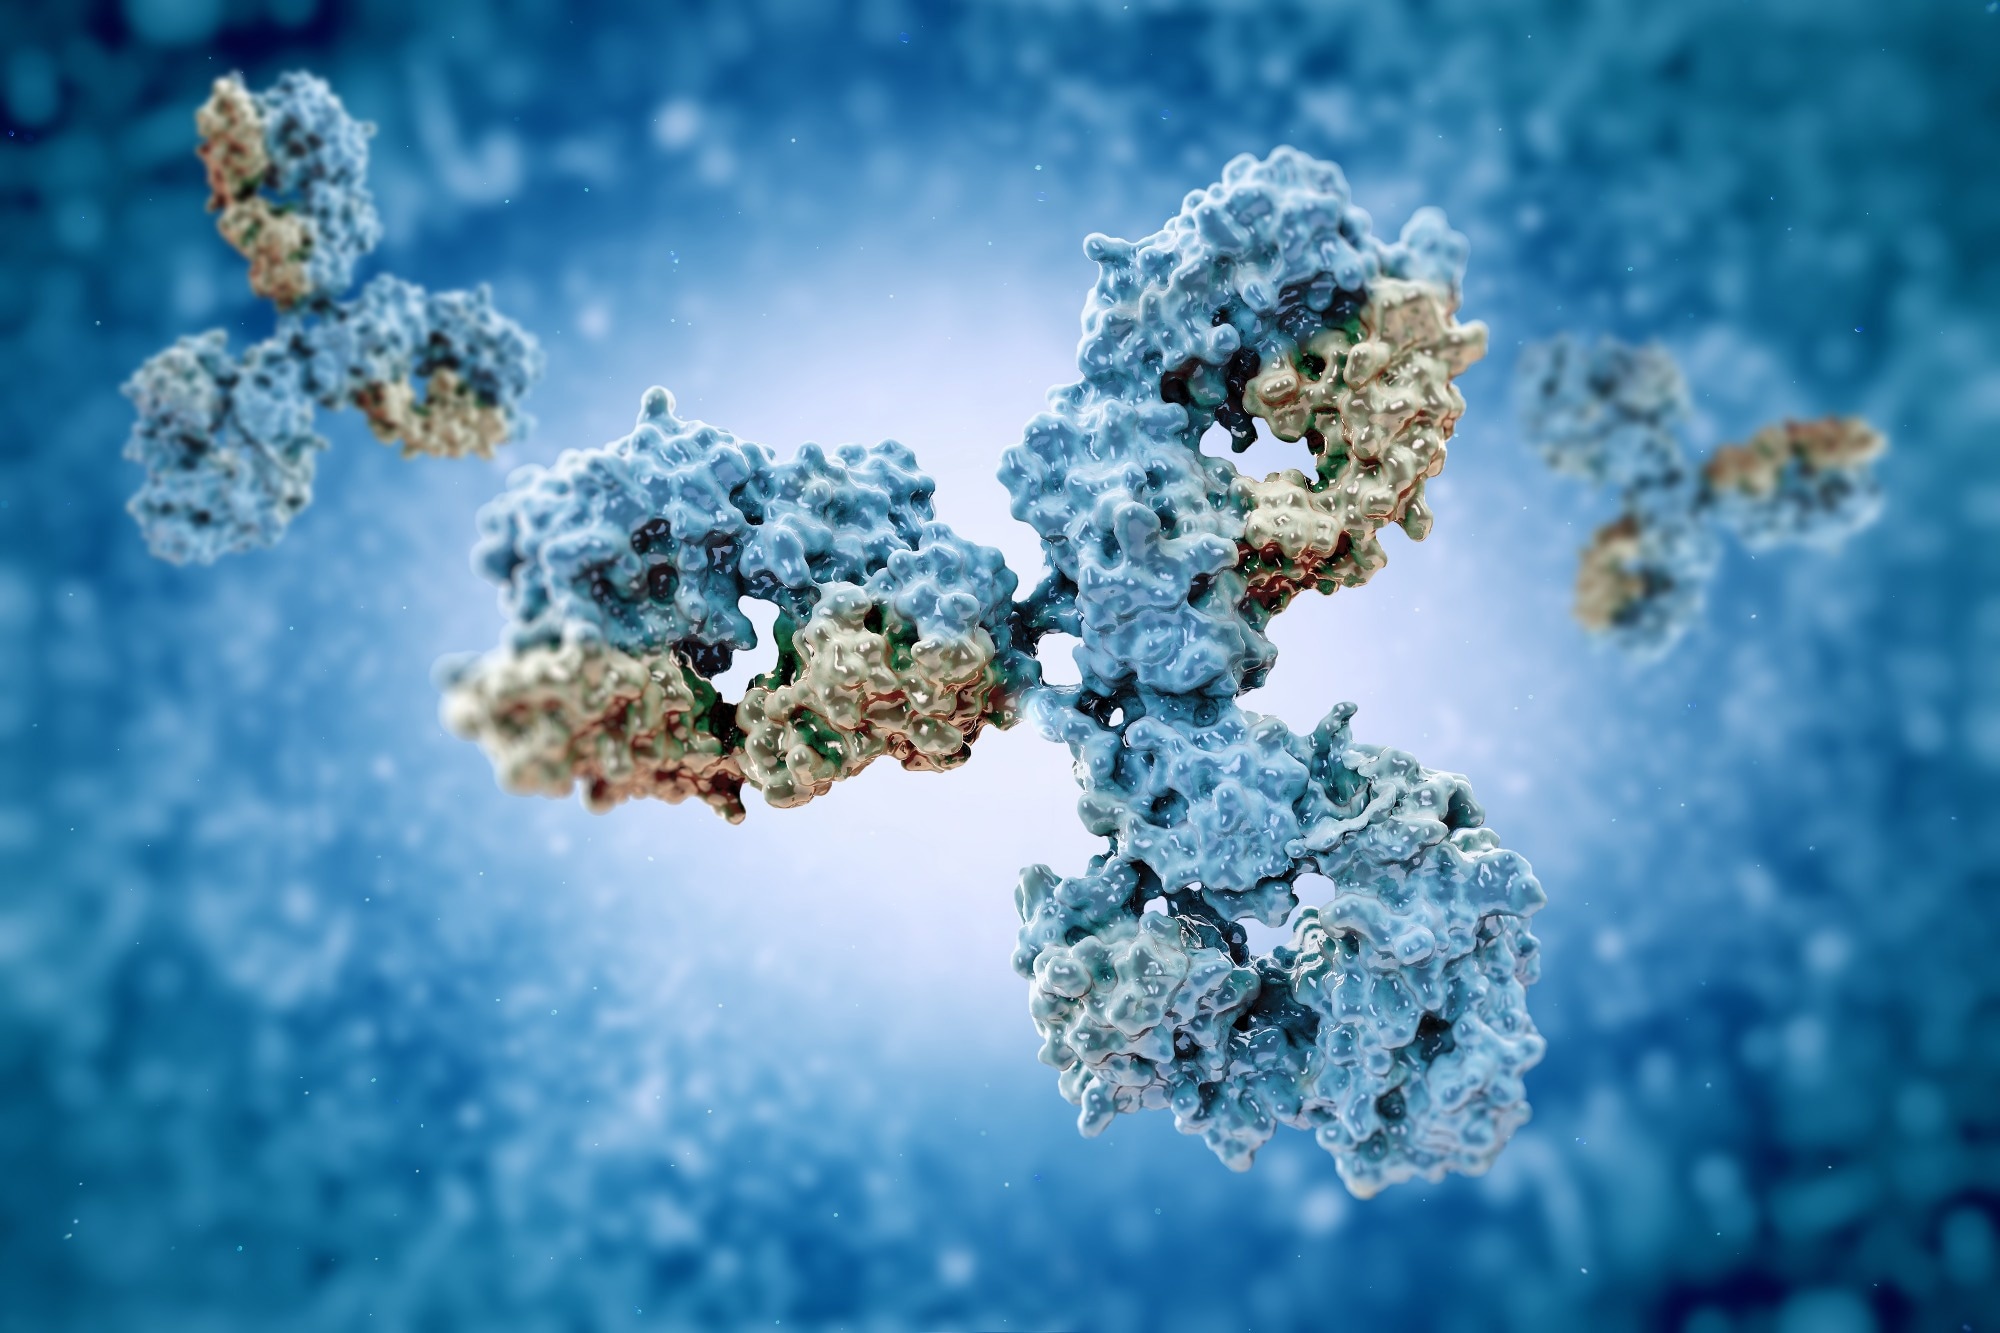 Study: Hybrid immunity expands the functional humoral footprint of both mRNA and vector-based SARS-CoV-2 vaccines. Image Credit: vitstudio / Shutterstock